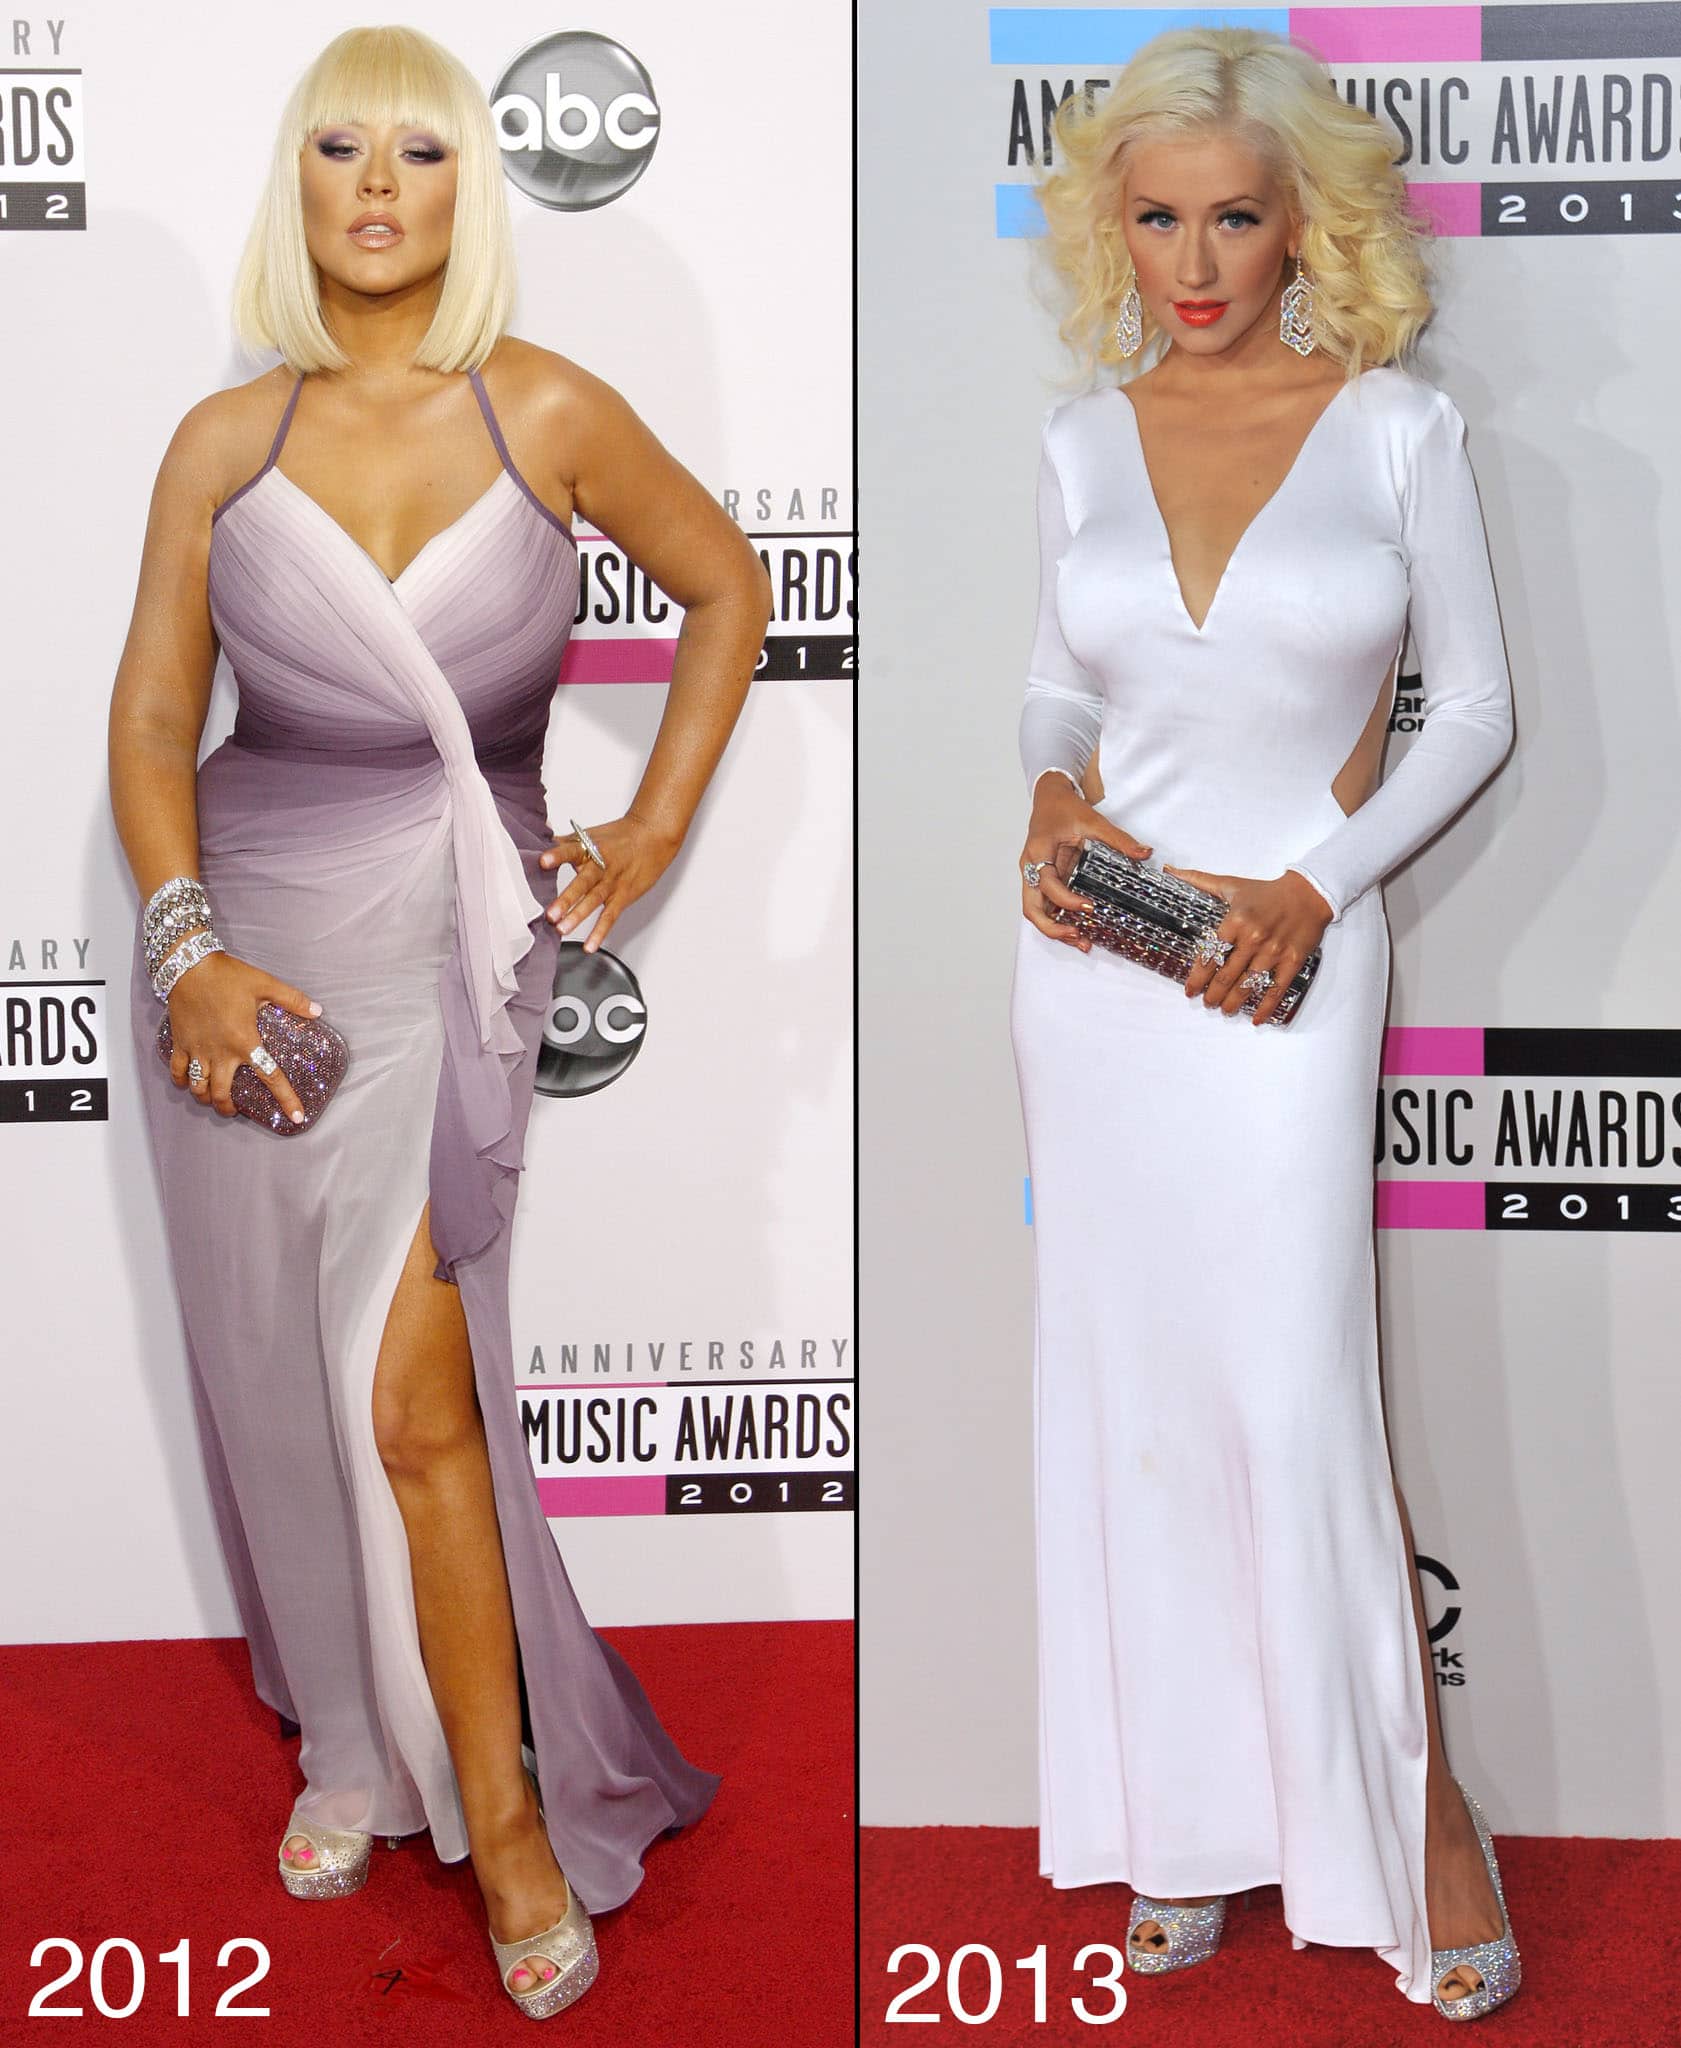 In 2013, Christina Aguilera lost 50 pounds by doing yoga and having a low-calorie diet